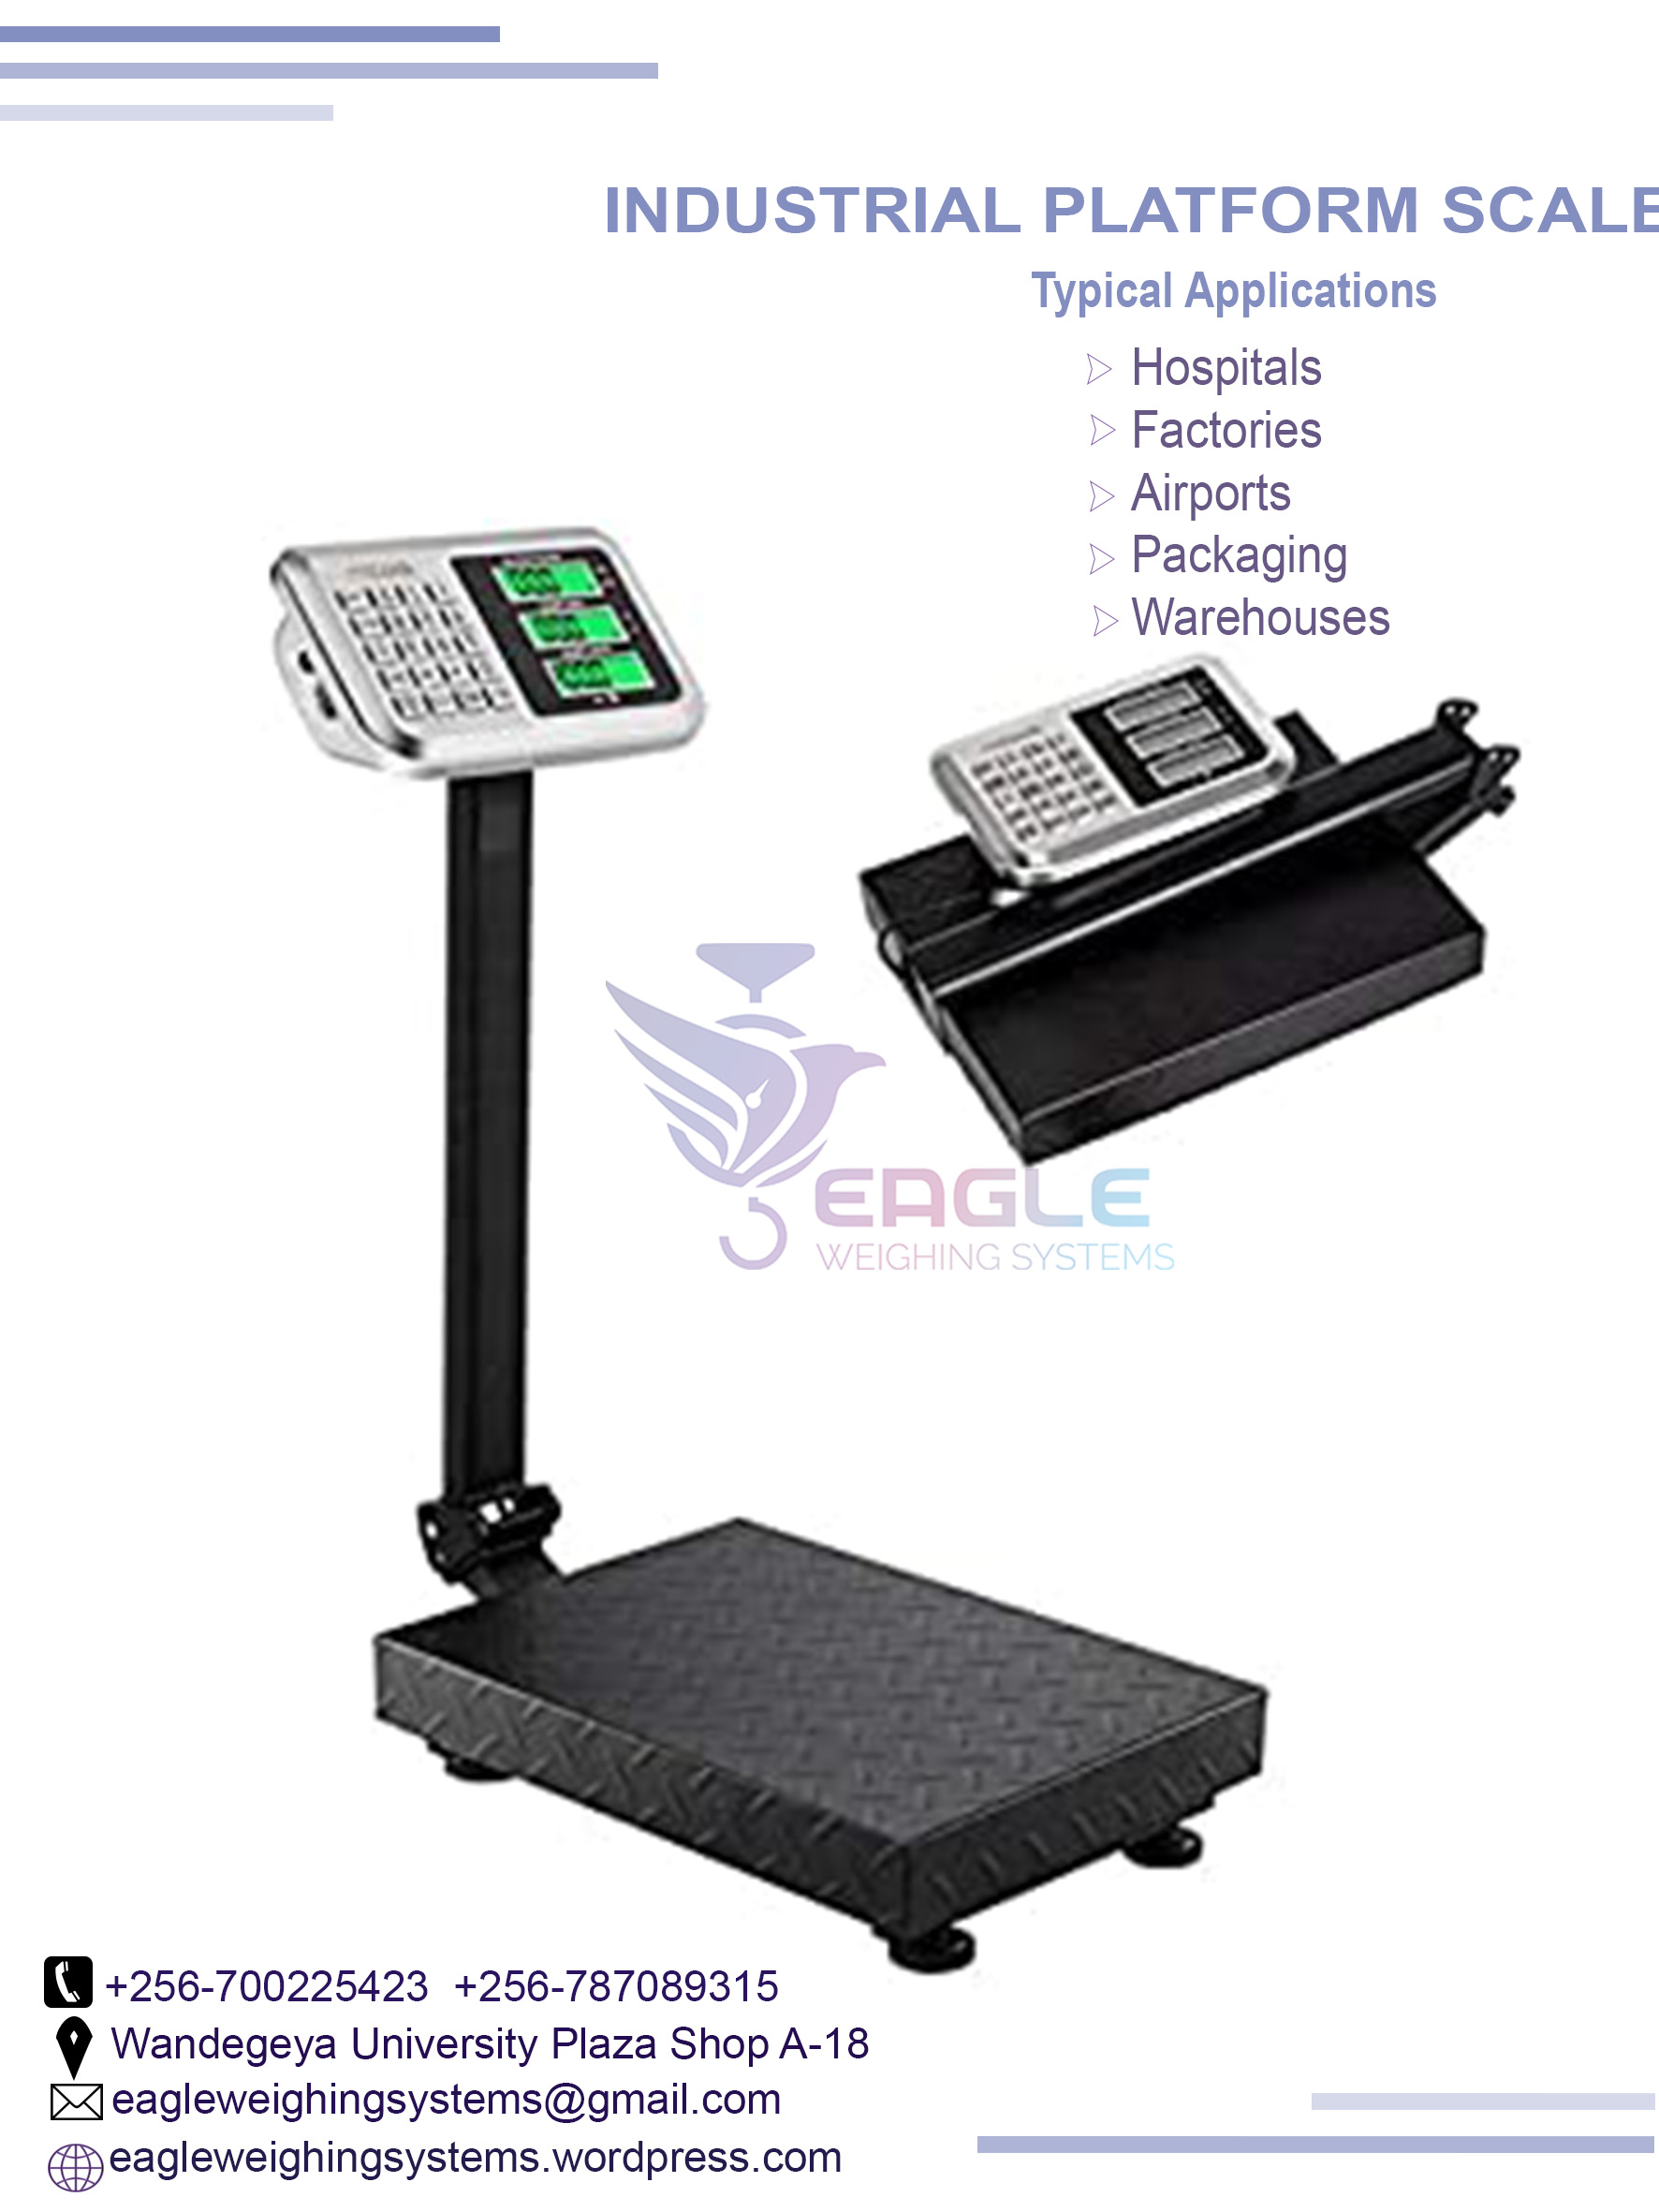 100kg digital weight machine for small factory, Kampala Central Division, Central, Uganda